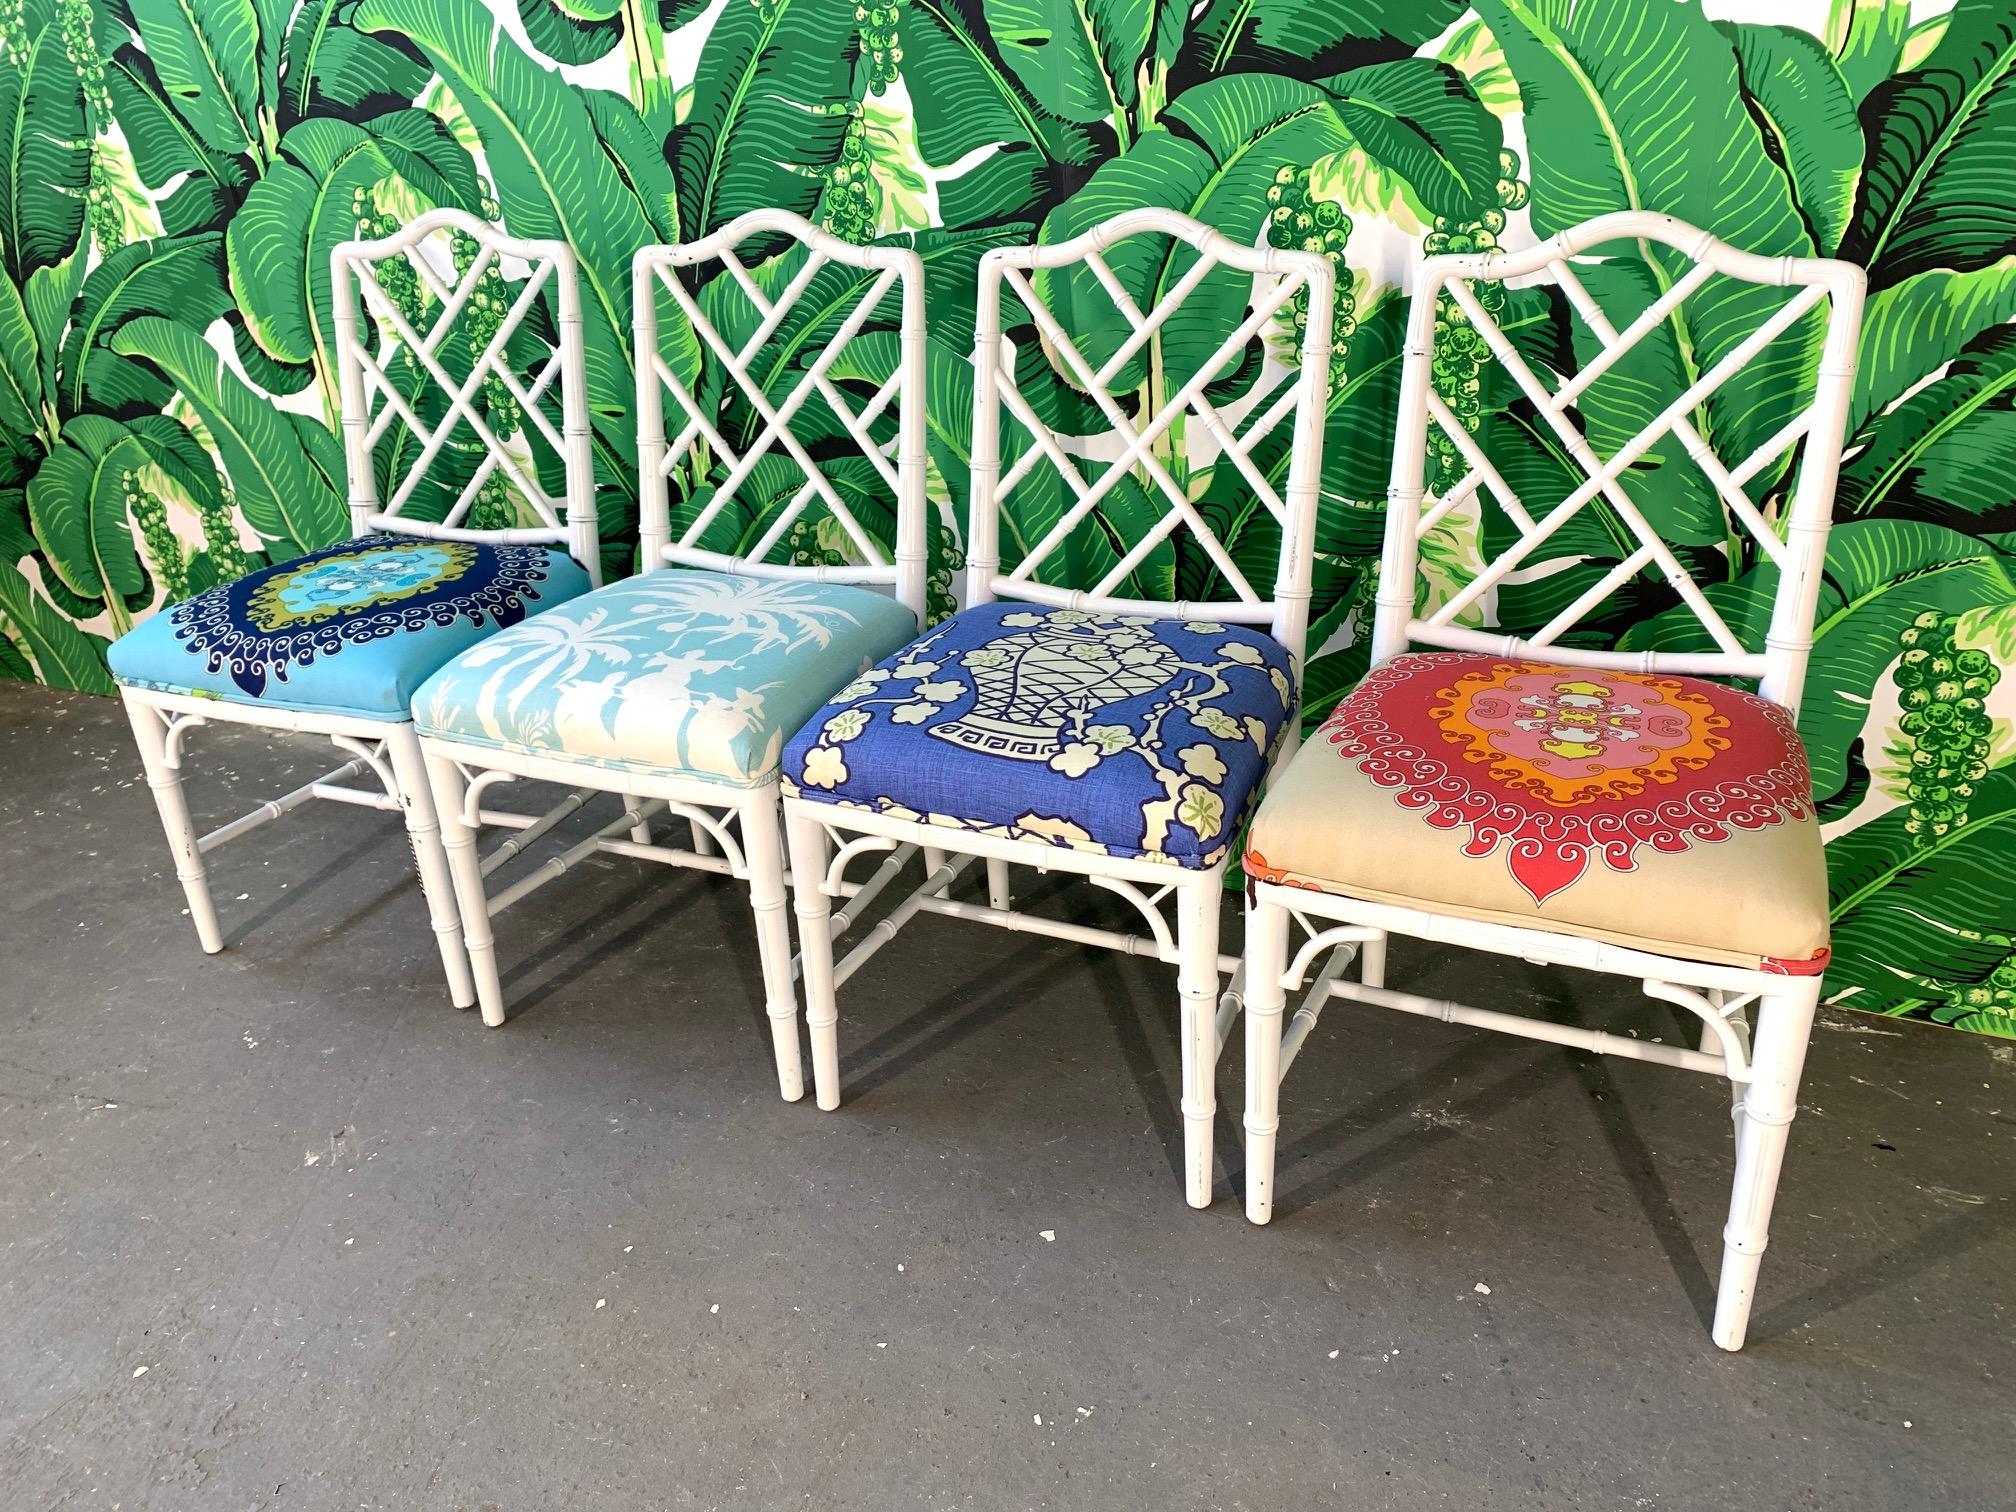 Set of four faux bamboo dining chairs in Chinese Chippendale style. Perfect touch of chinoiserie in any decor. Cheery upholstery unique to each chair. Very good vintage condition with only minor abrasions consistent with age.